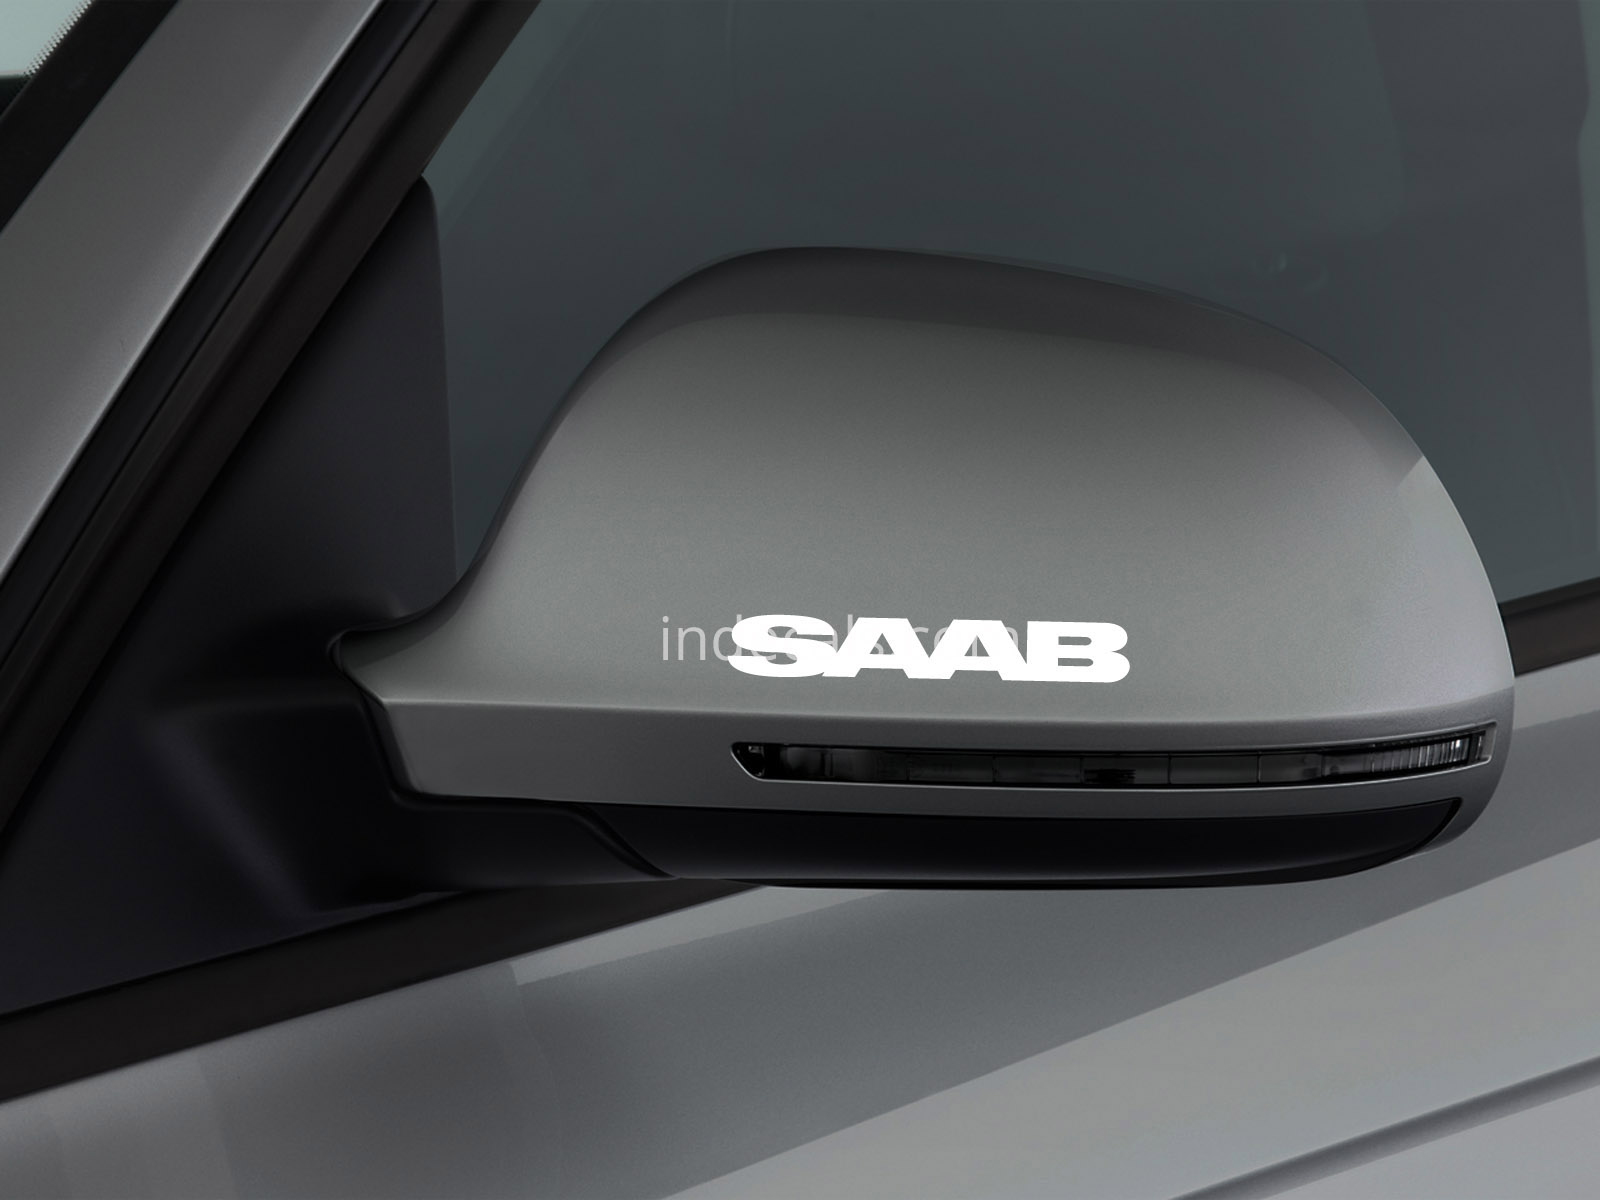 3 x Saab Stickers for Mirror - White